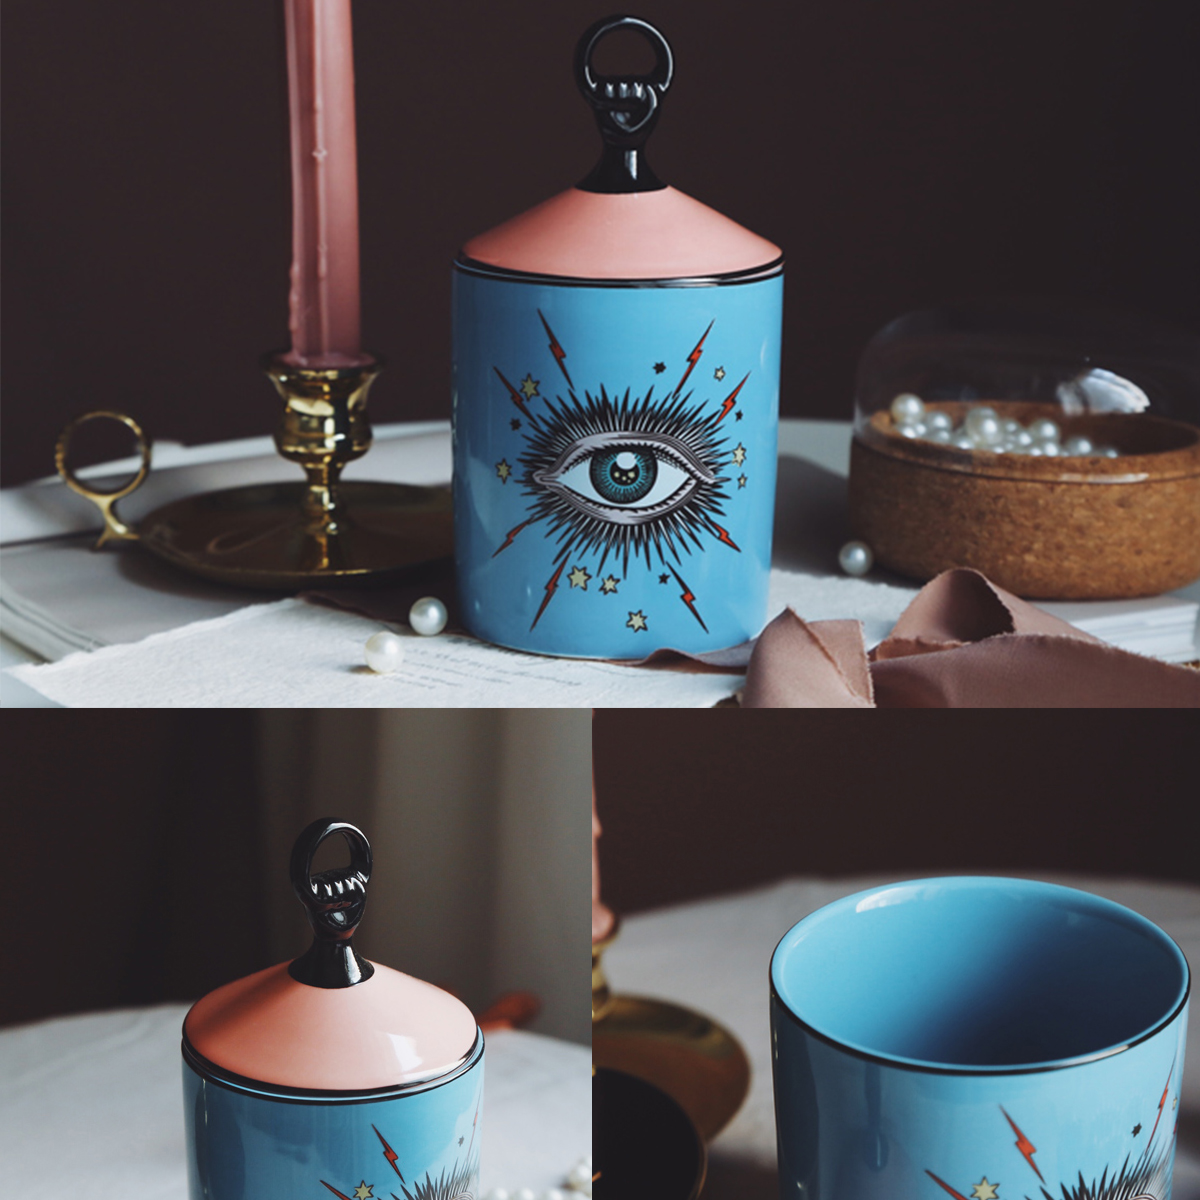 Big-Eyes-Jar-Hands-with-Ceramic-Lids-Decorative-Cans-Candle-Holders-Storage-Cans-Cosmetic-Storage-Ta-1649421-3